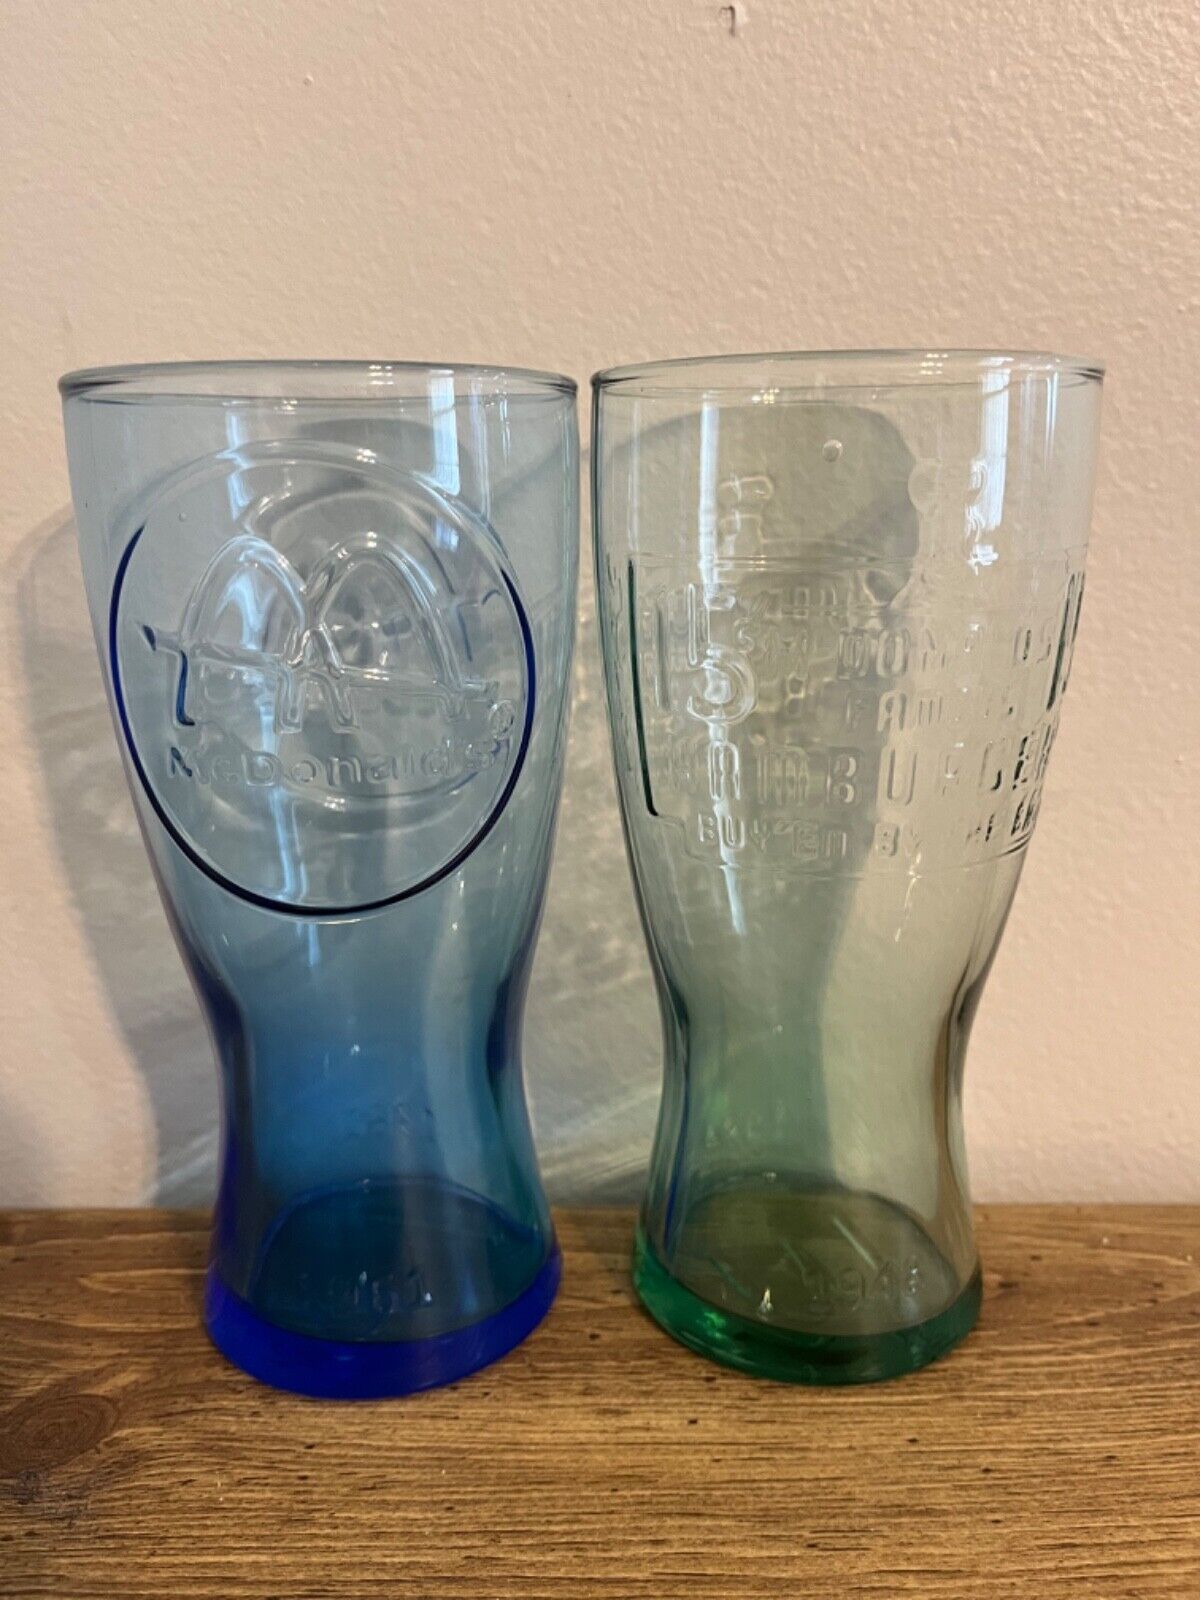 2 Vintage McDonald’s Glasses 1948 and 1961